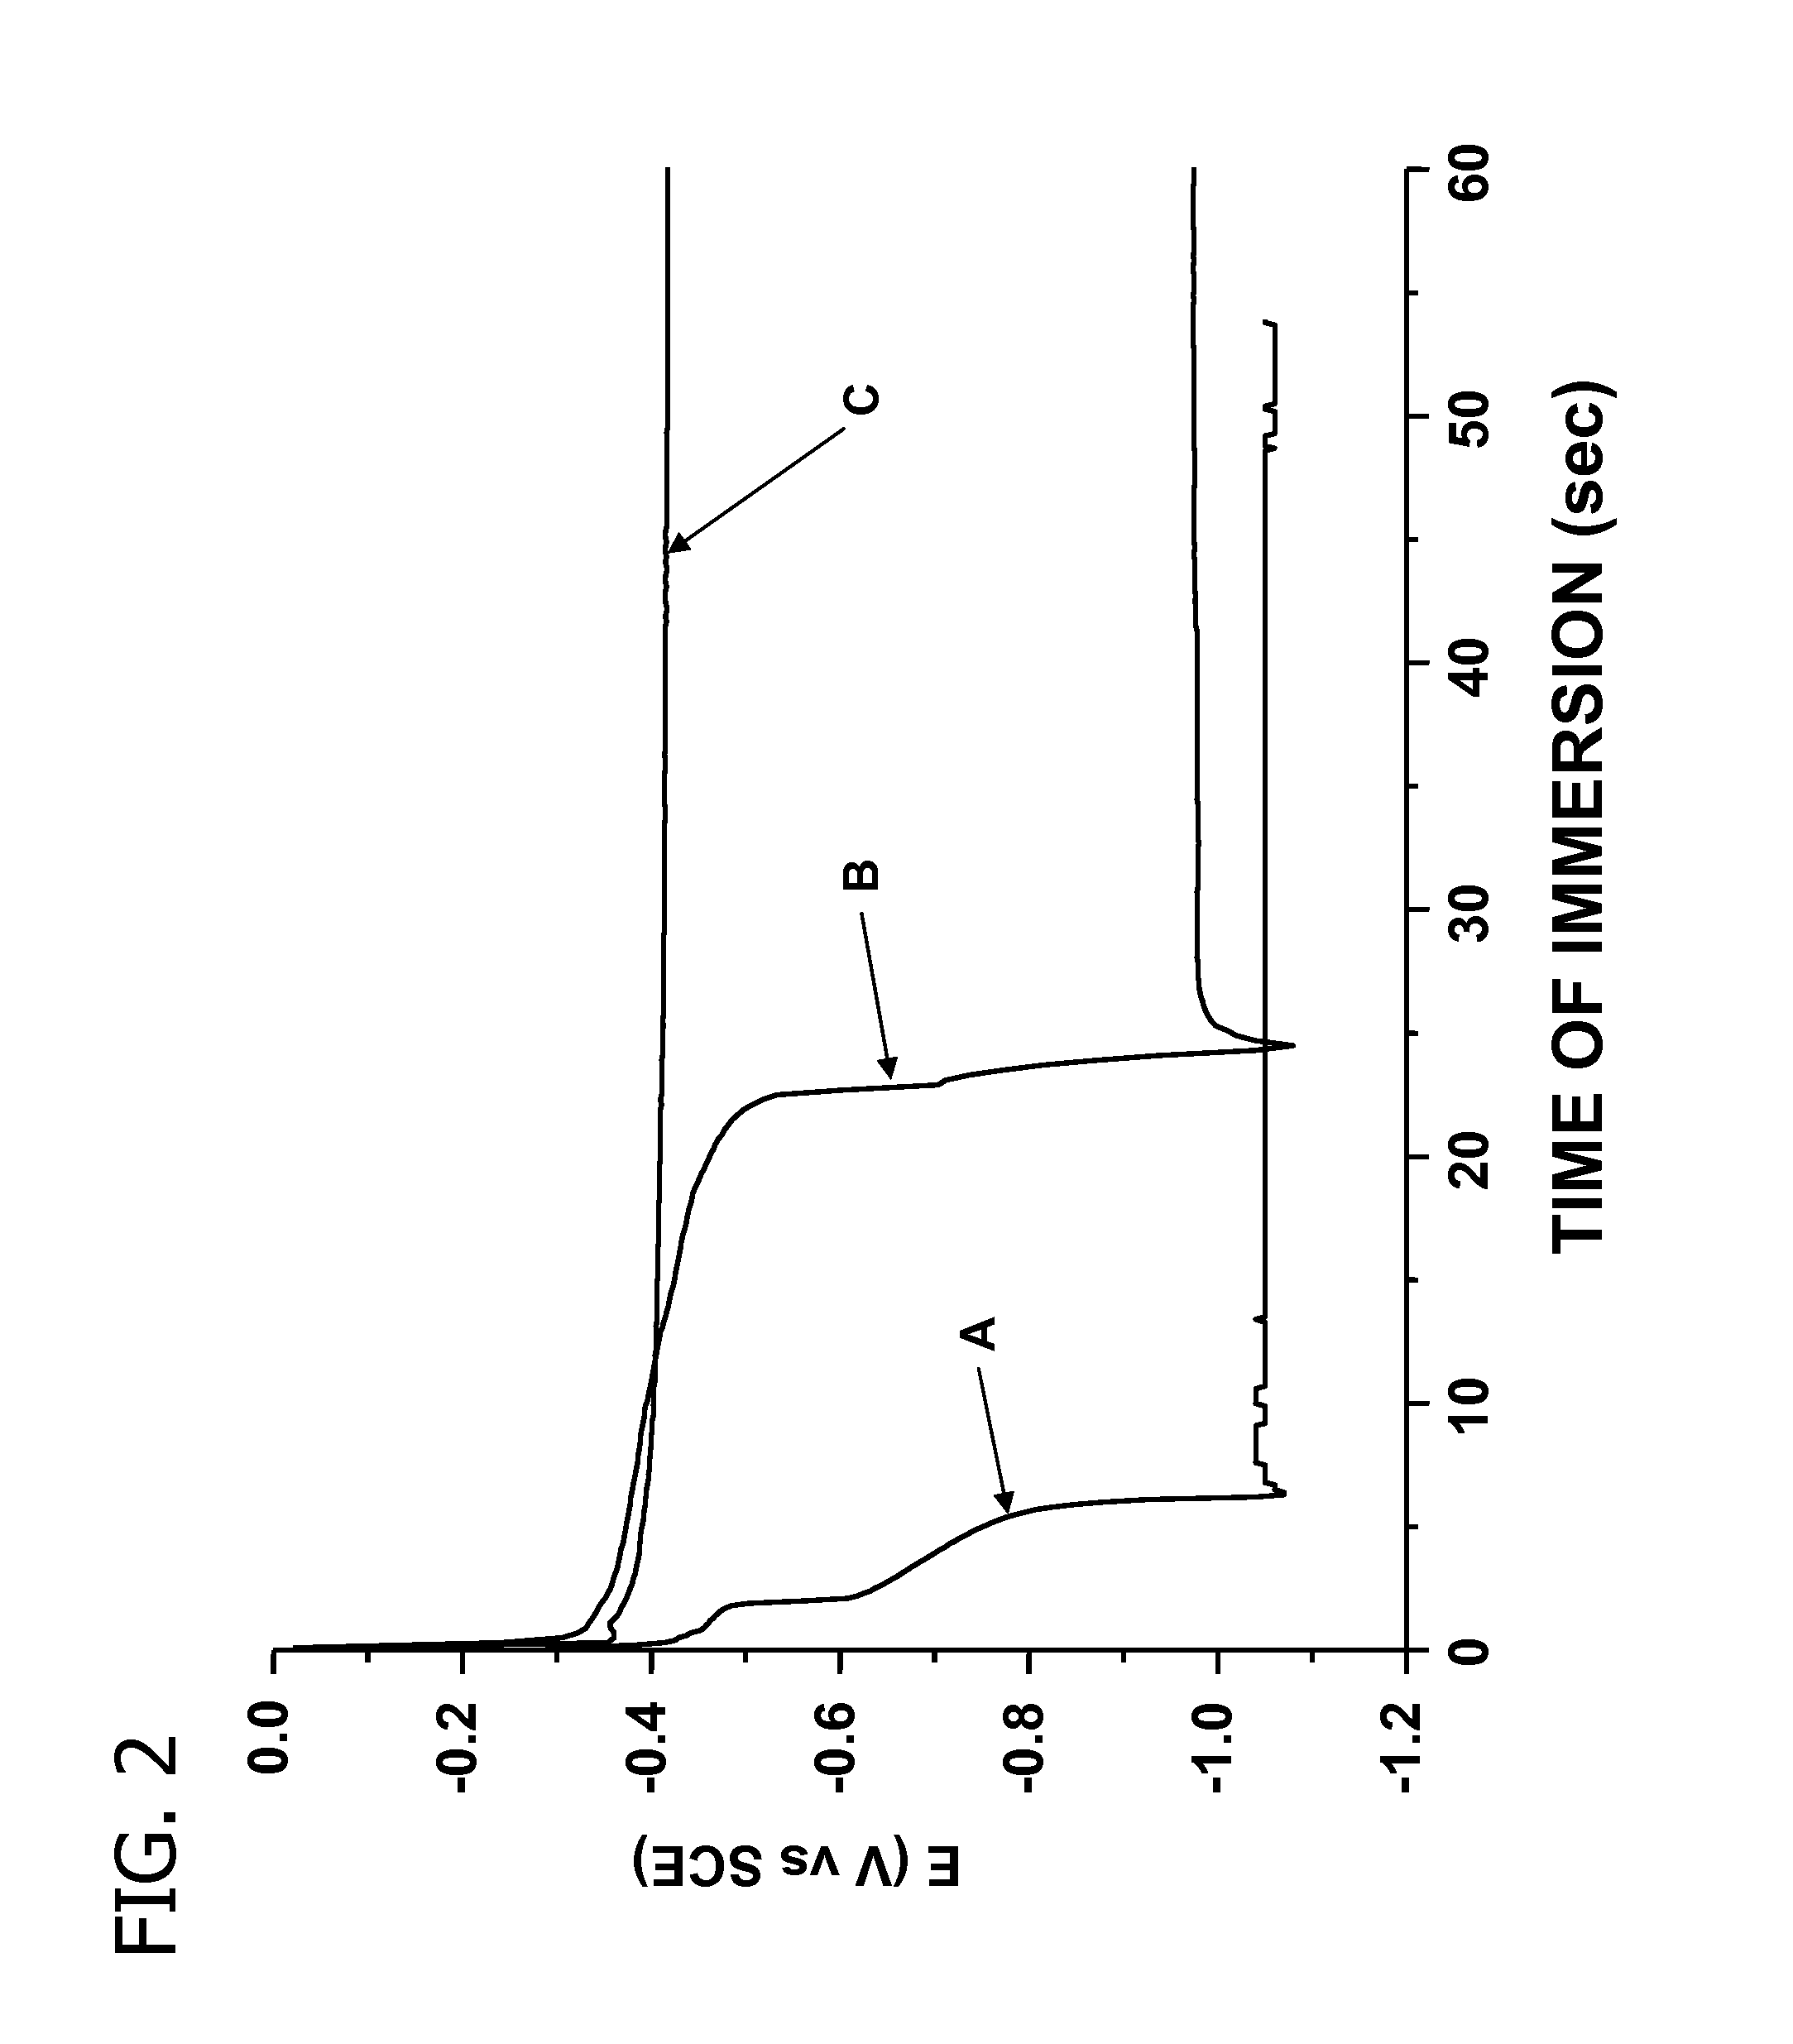 Manufacture of electroless cobalt deposition compositions for microelectronics applications